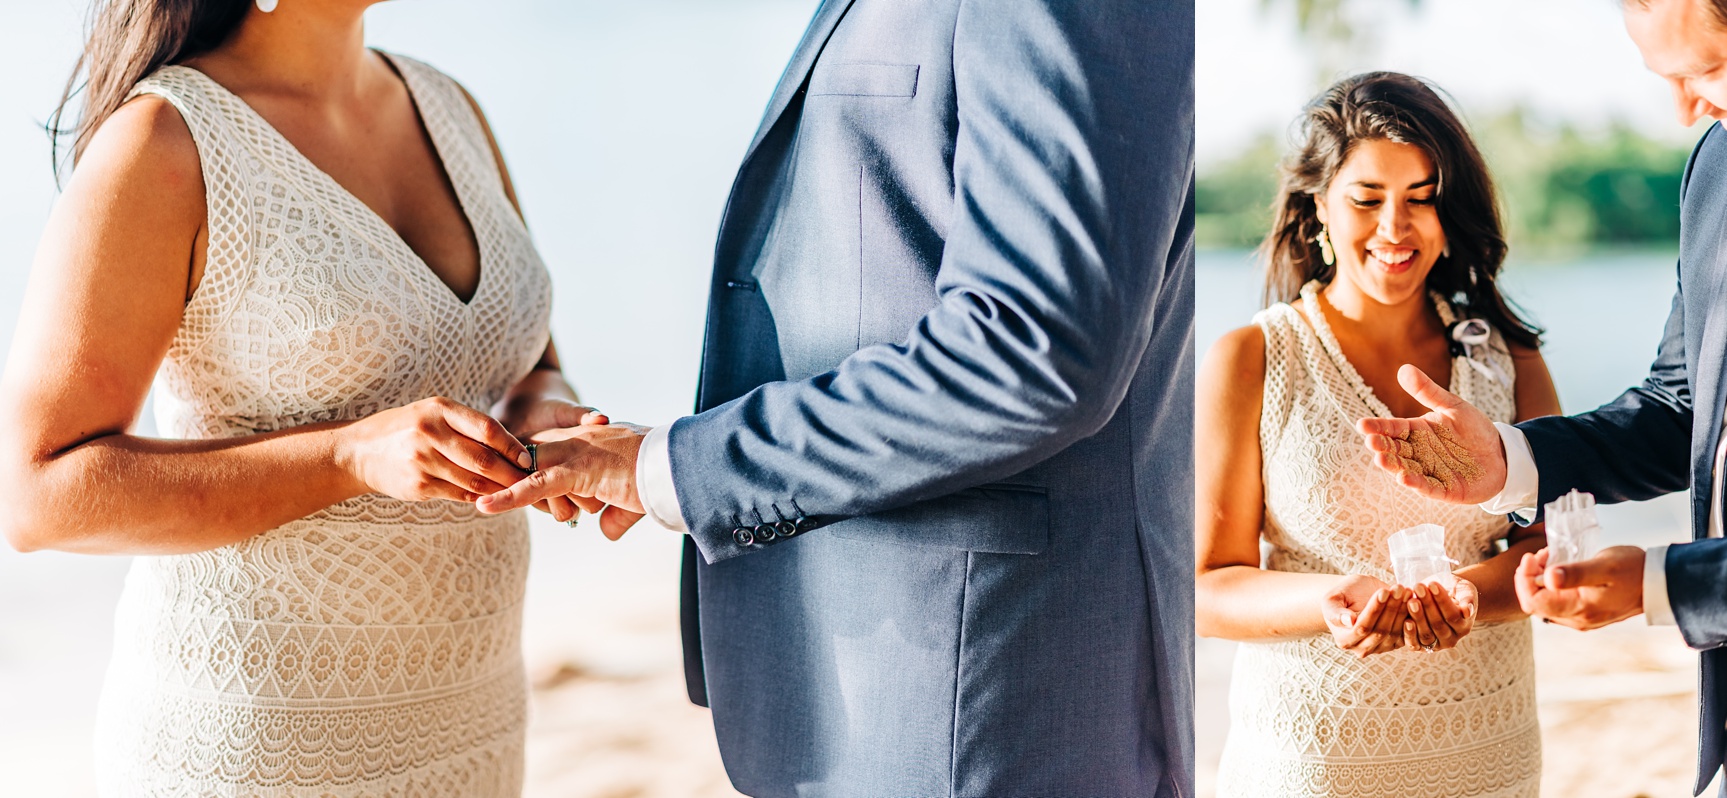 Outer Banks Elopement